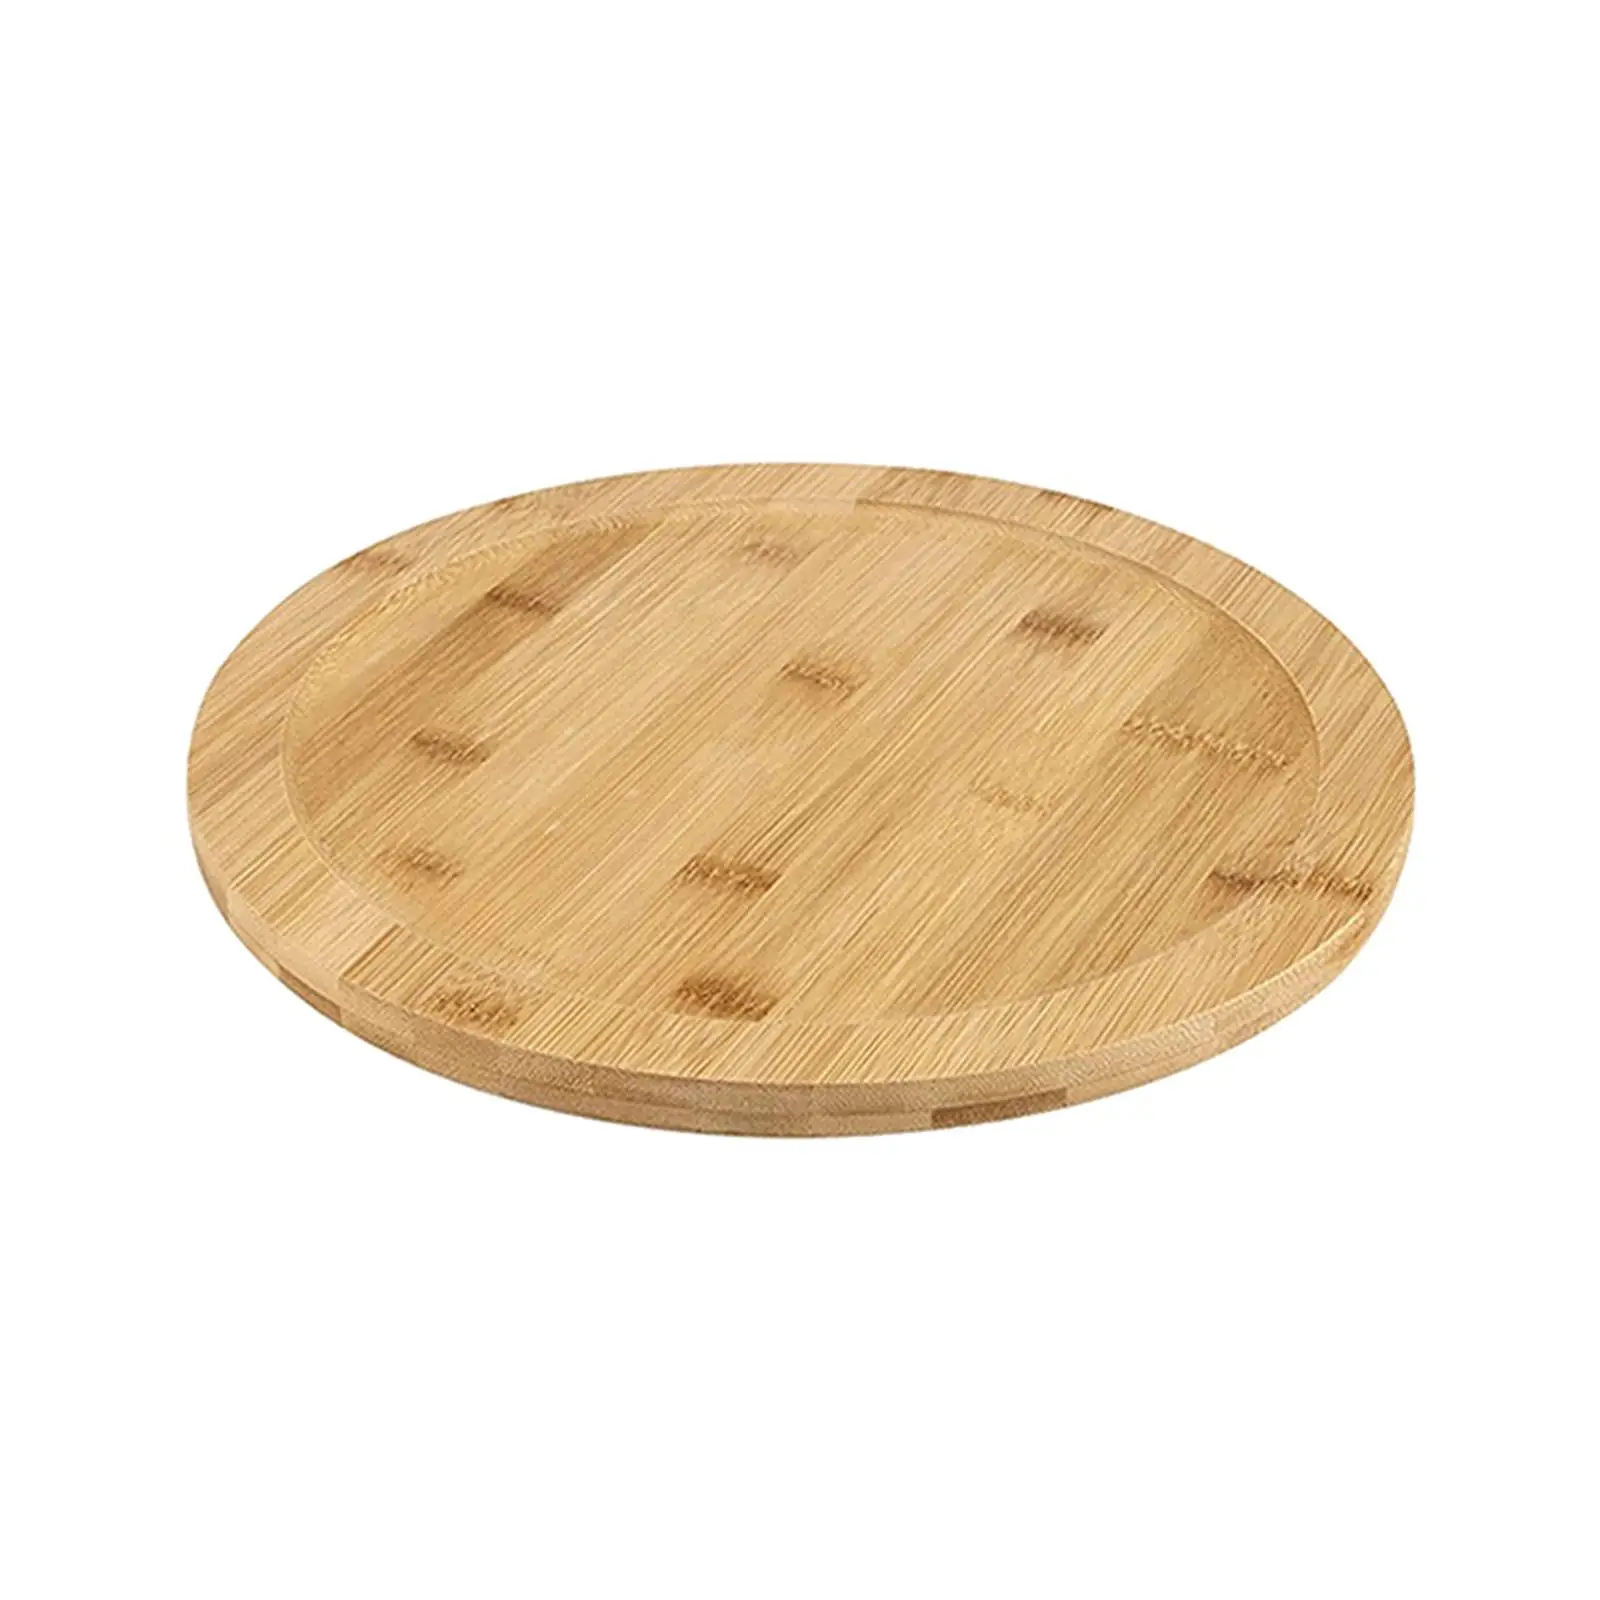 Wooden Turntable Rotating Board Wooden Rotating Dining Plate Rotating Base for Home Pantry Kitchen Countertop Dining Table